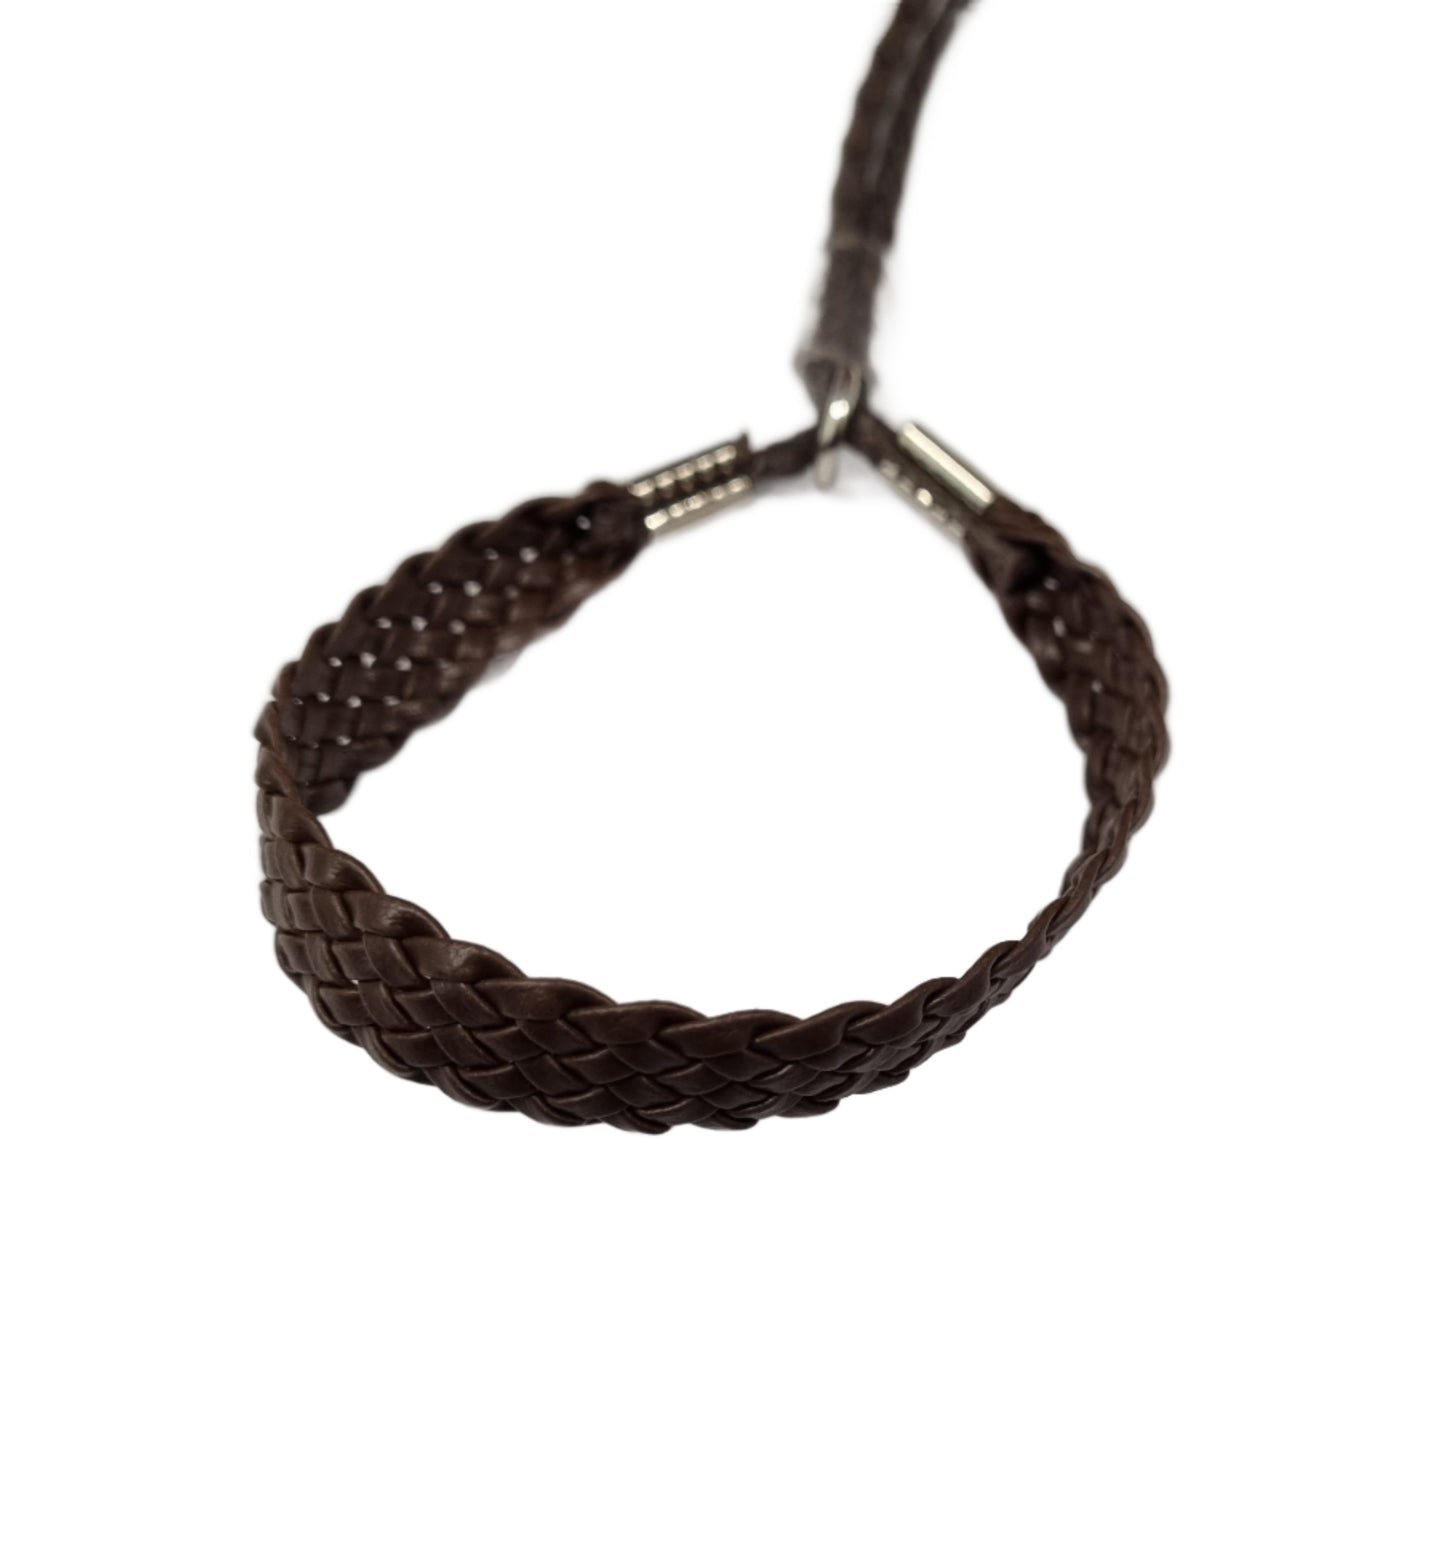 Waxed Leather Japanese Cord Lead with Braided Neck - Assorted Colours